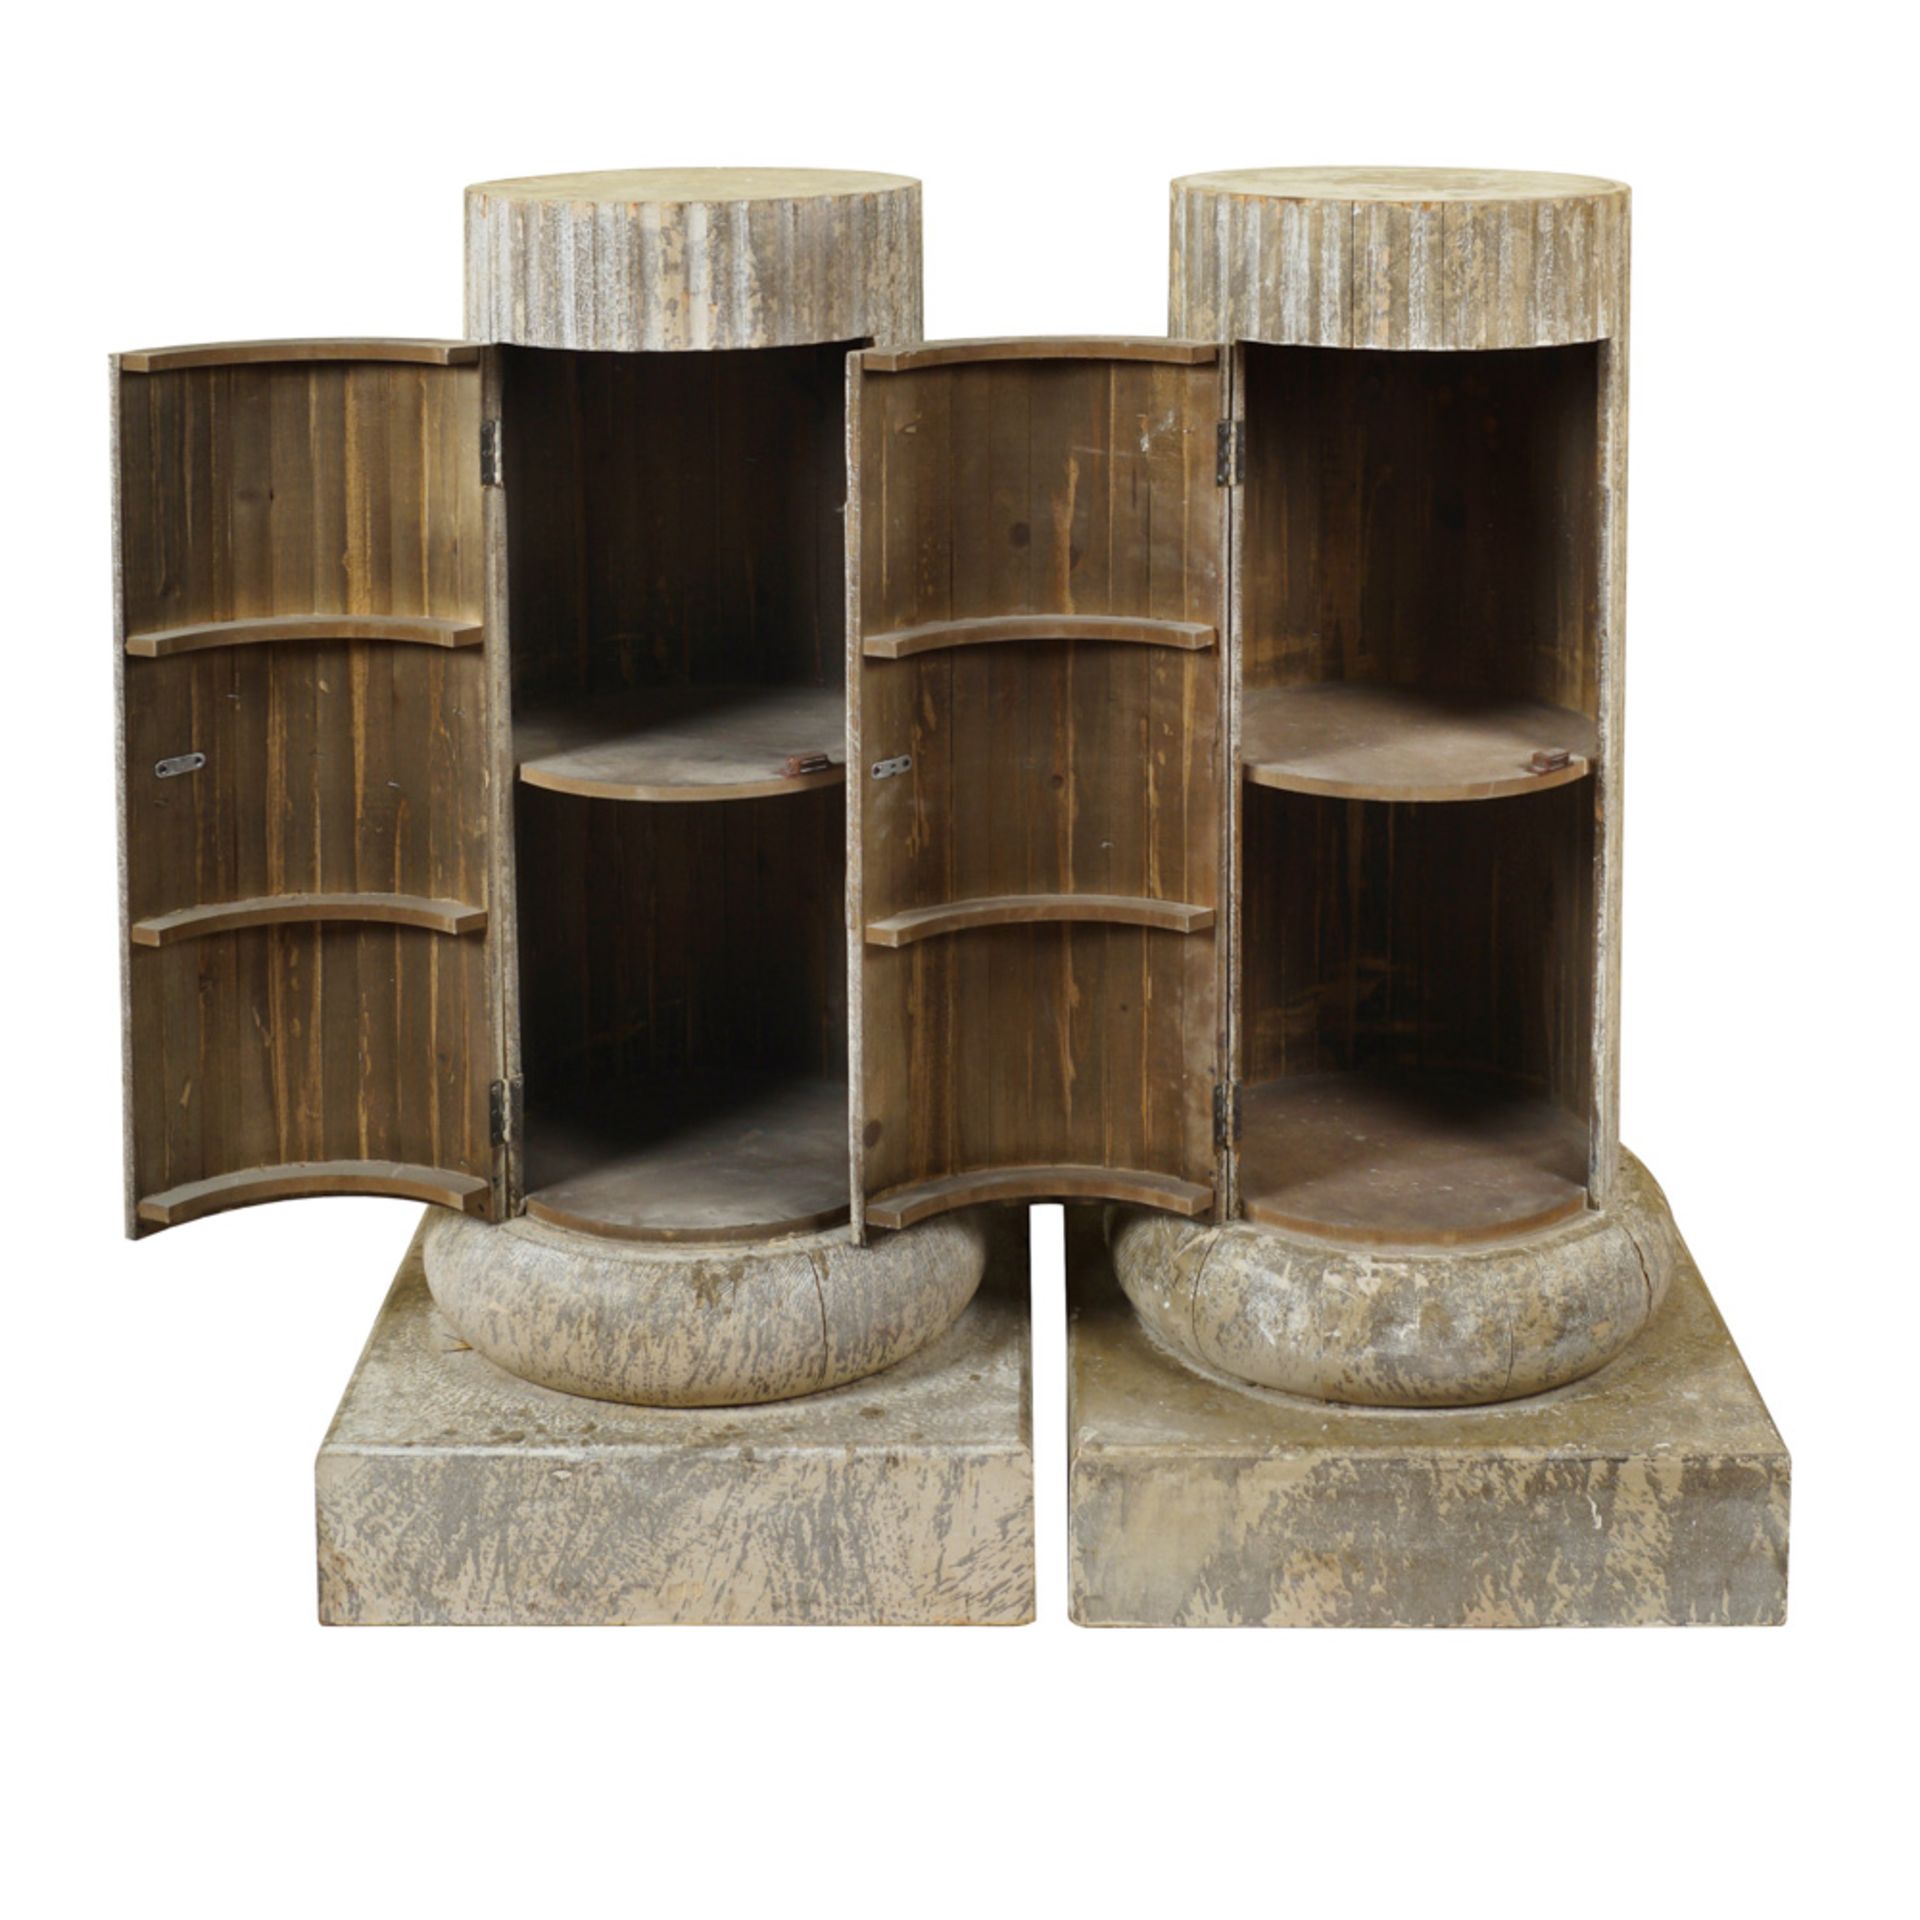 Pair of lacquered wood columns 20th century 105x50x50 cm. - Image 2 of 2